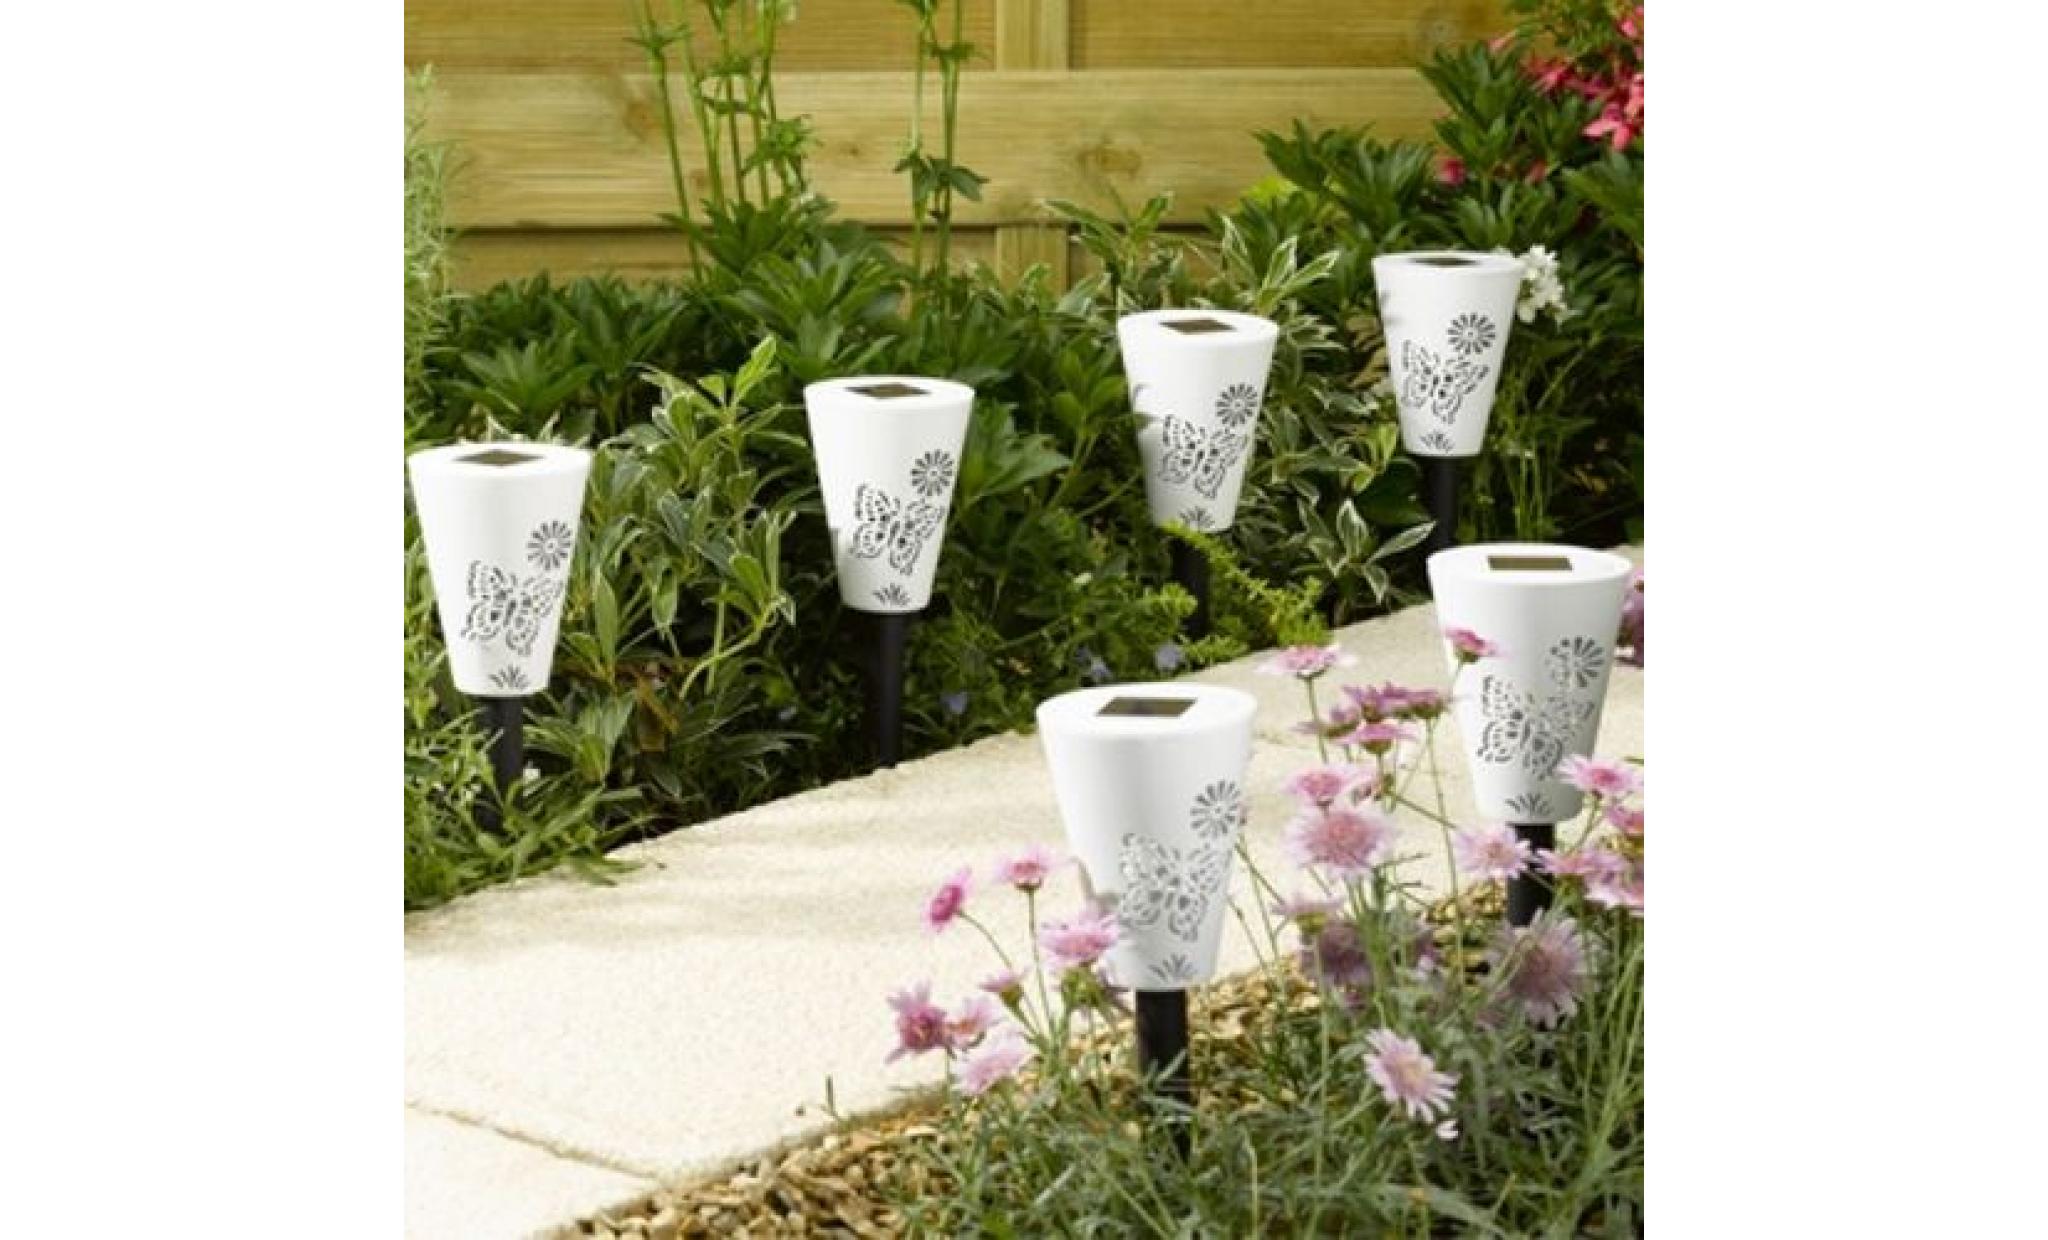 6 balises solaire silhouette papillons